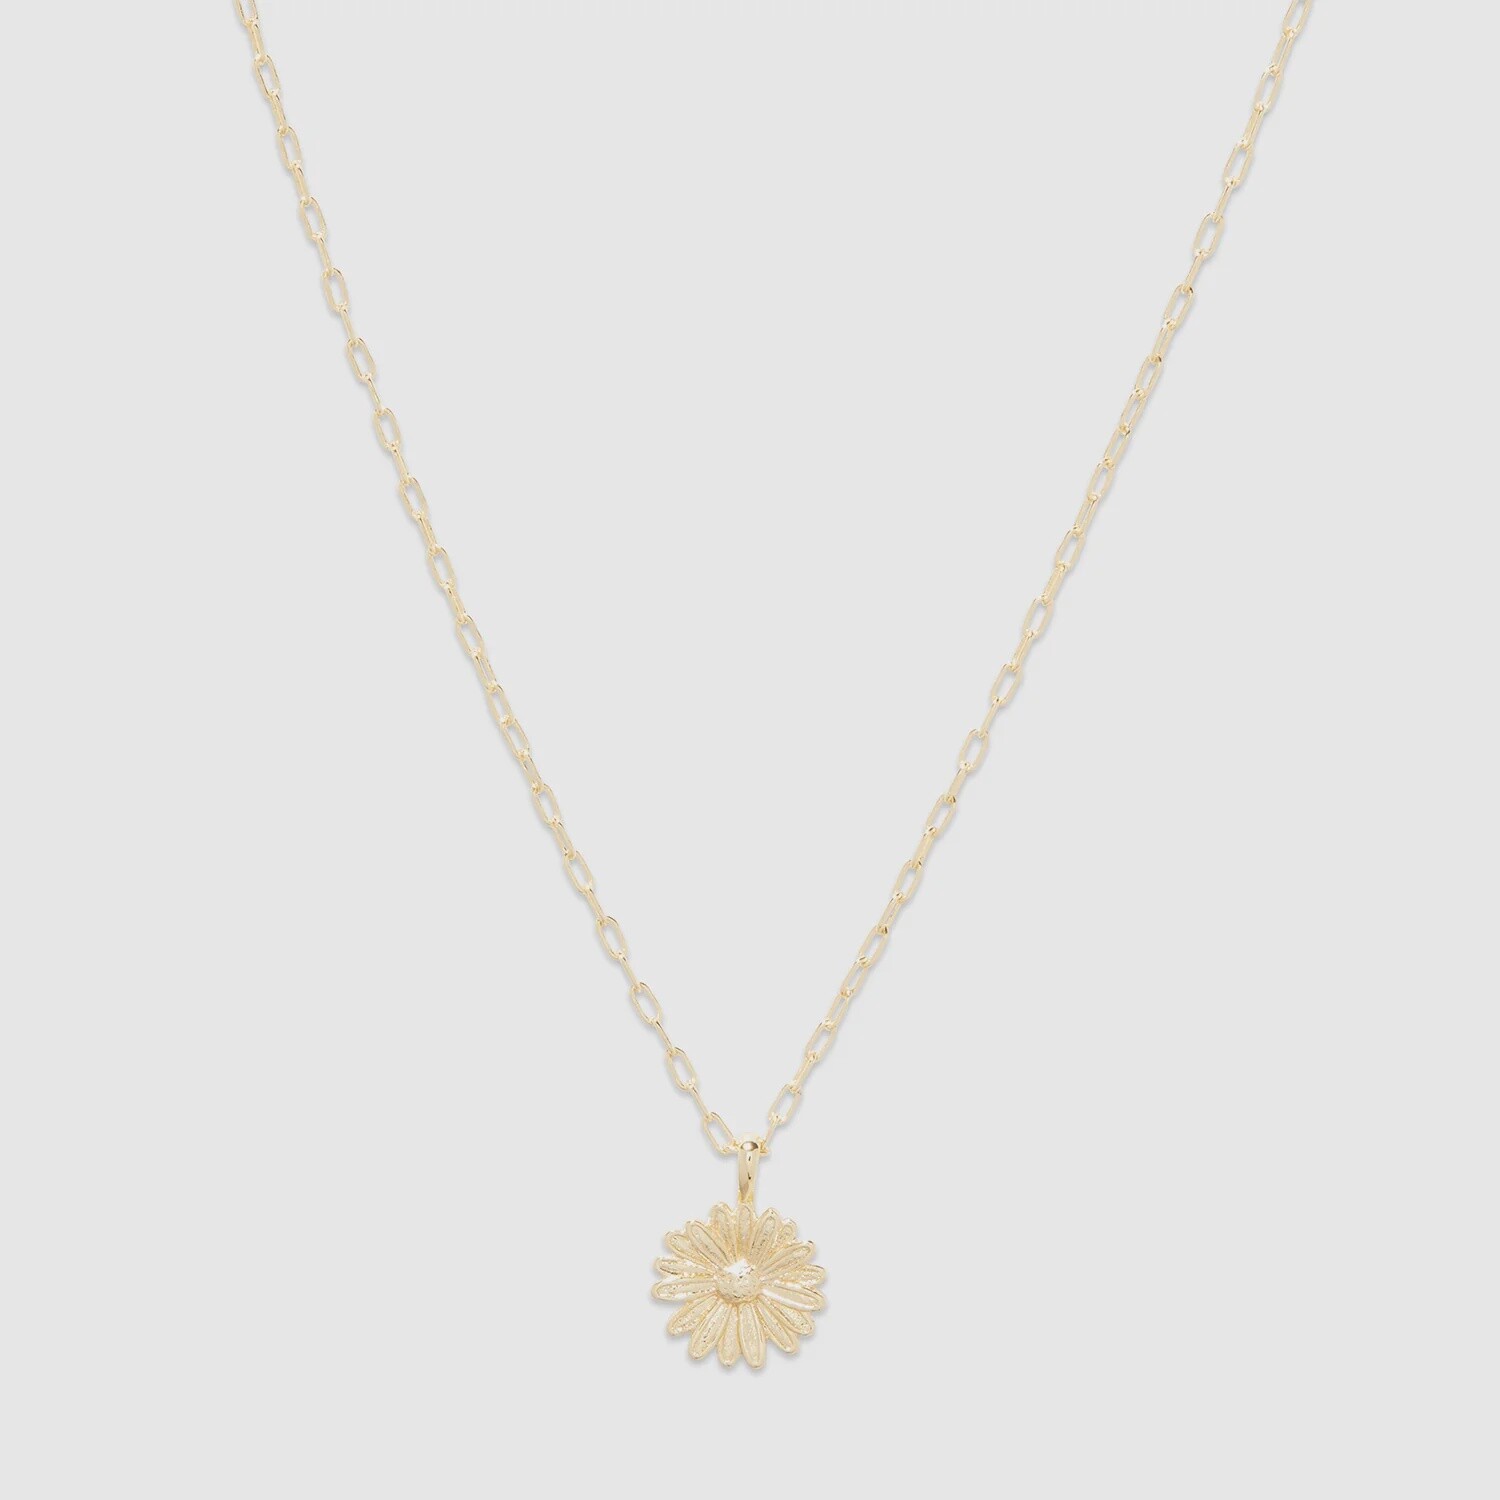 Daisy Necklace - Gold